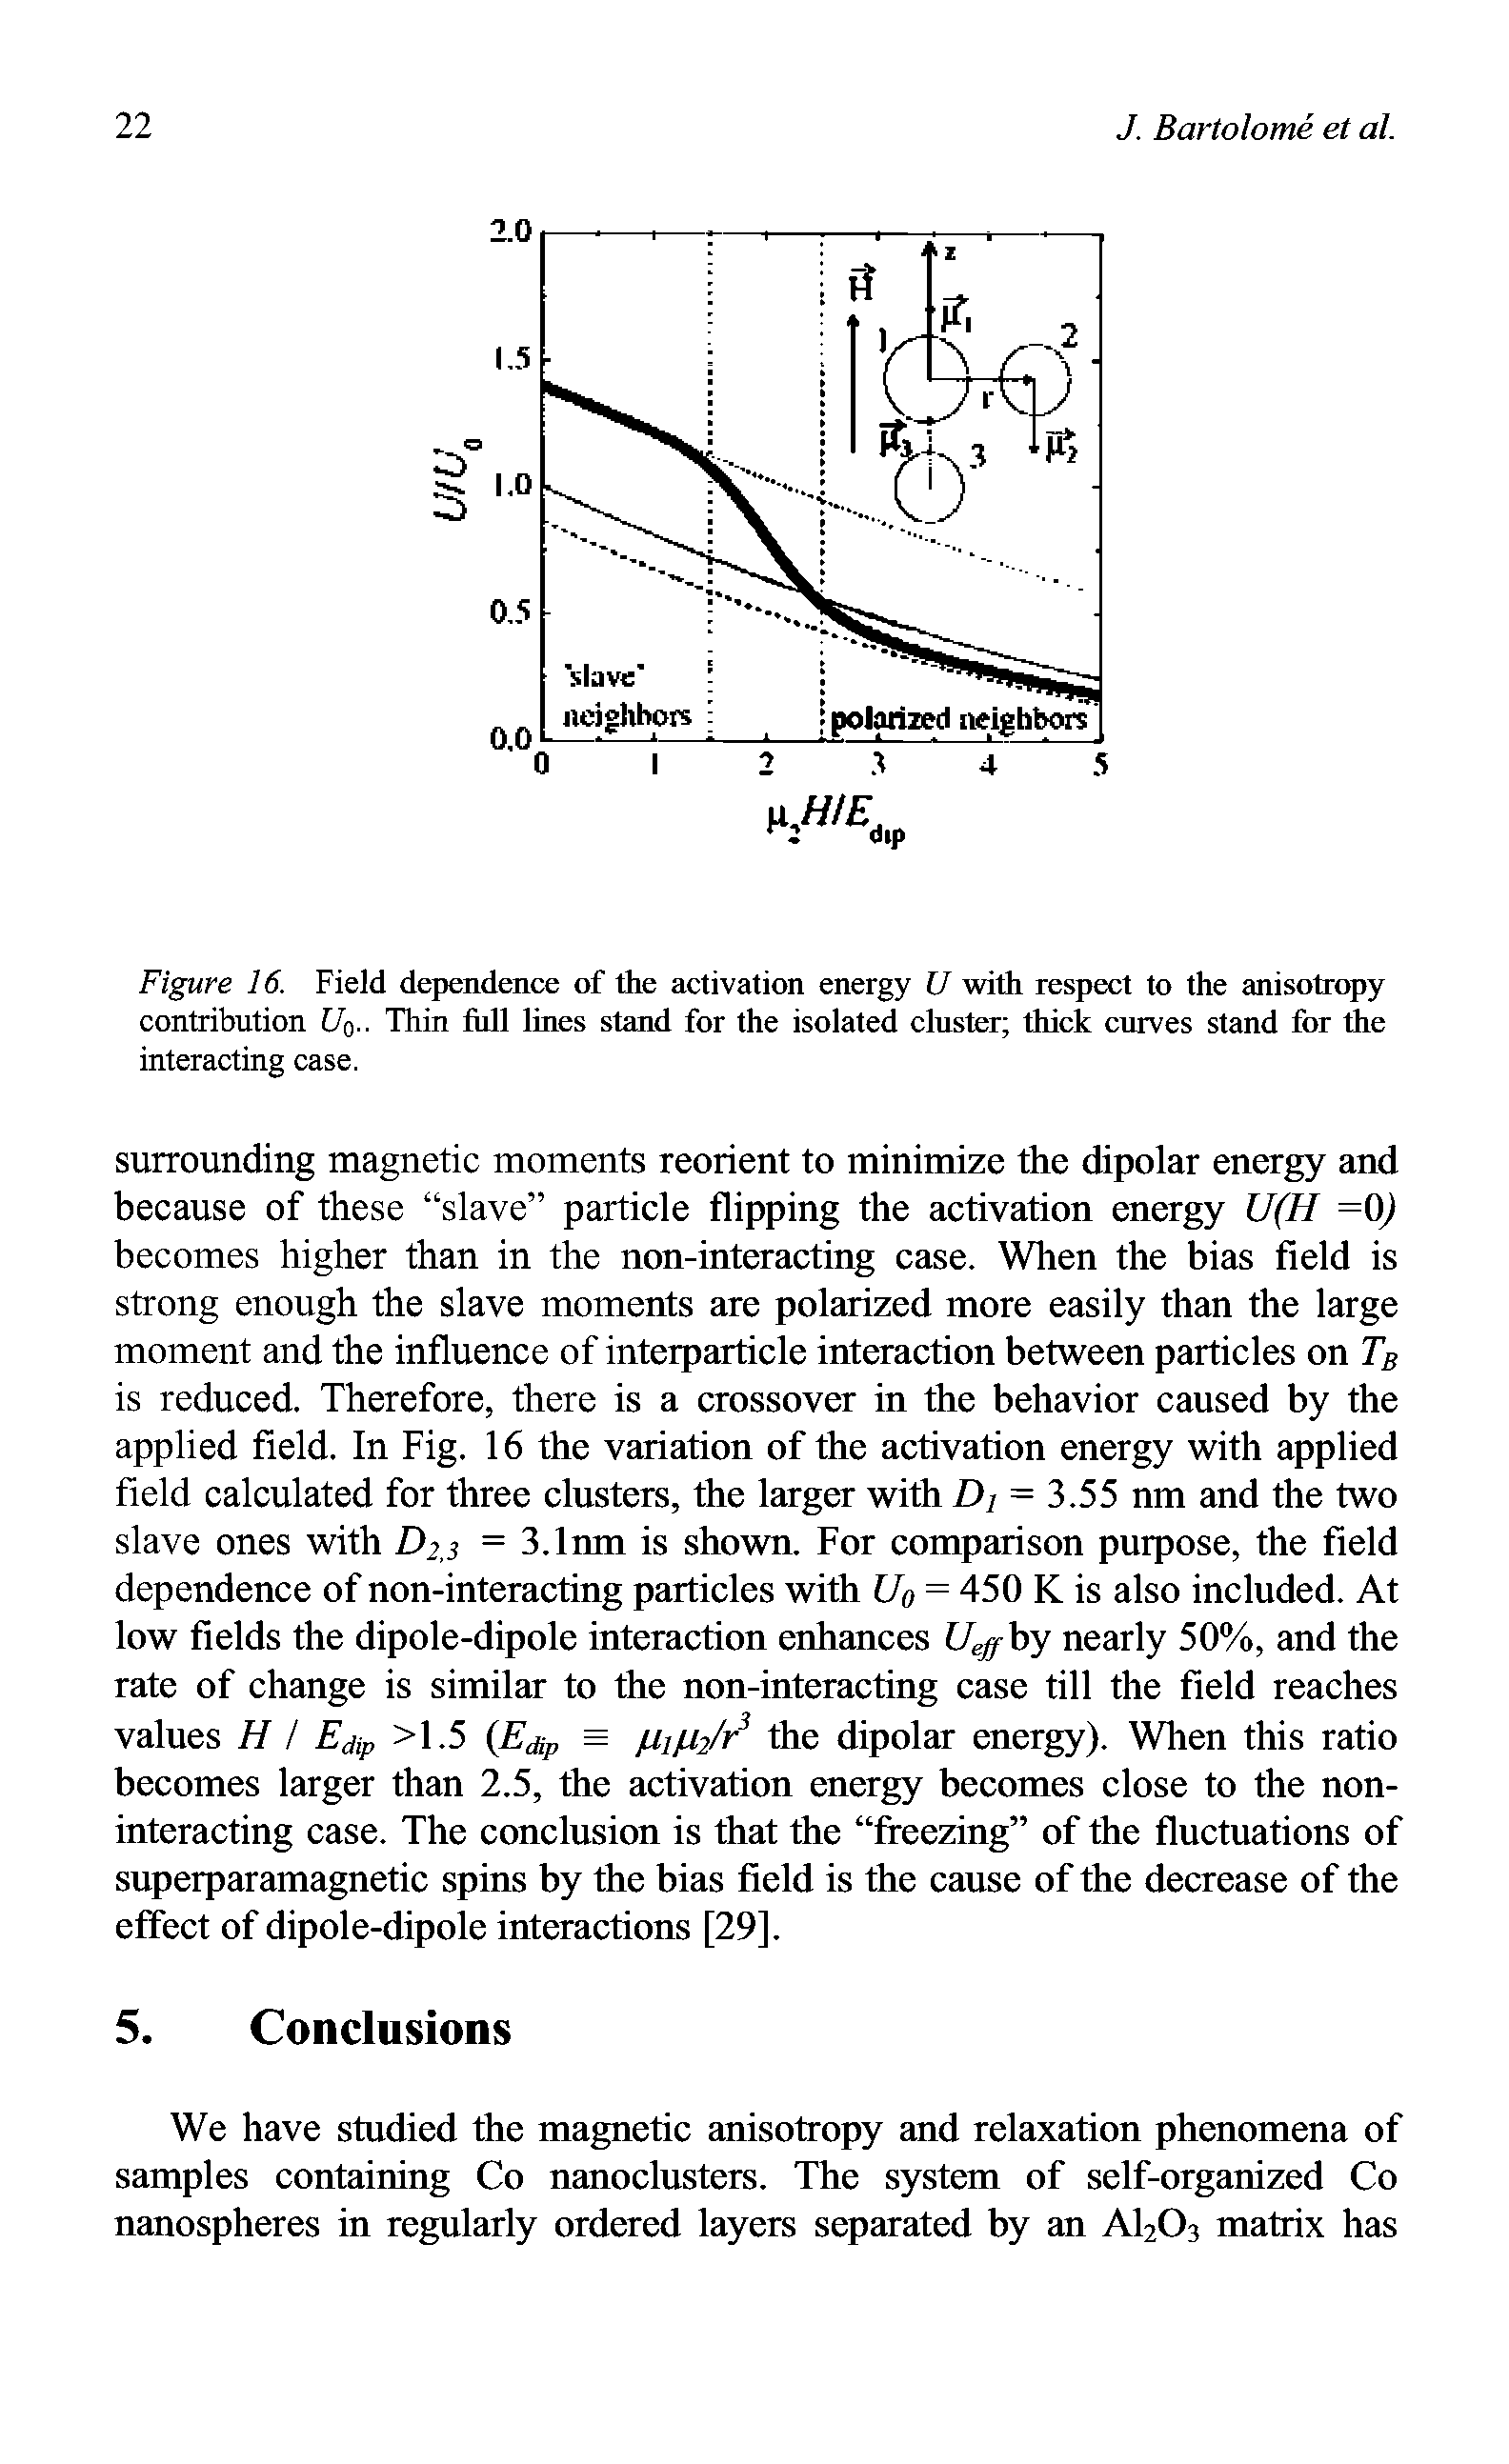 Figure 16. Field dependence of the activation energy U with respect to the anisotropy contribution Uq.. Thin full lines stand for the isolated cluster thick curves stand for the interacting case.